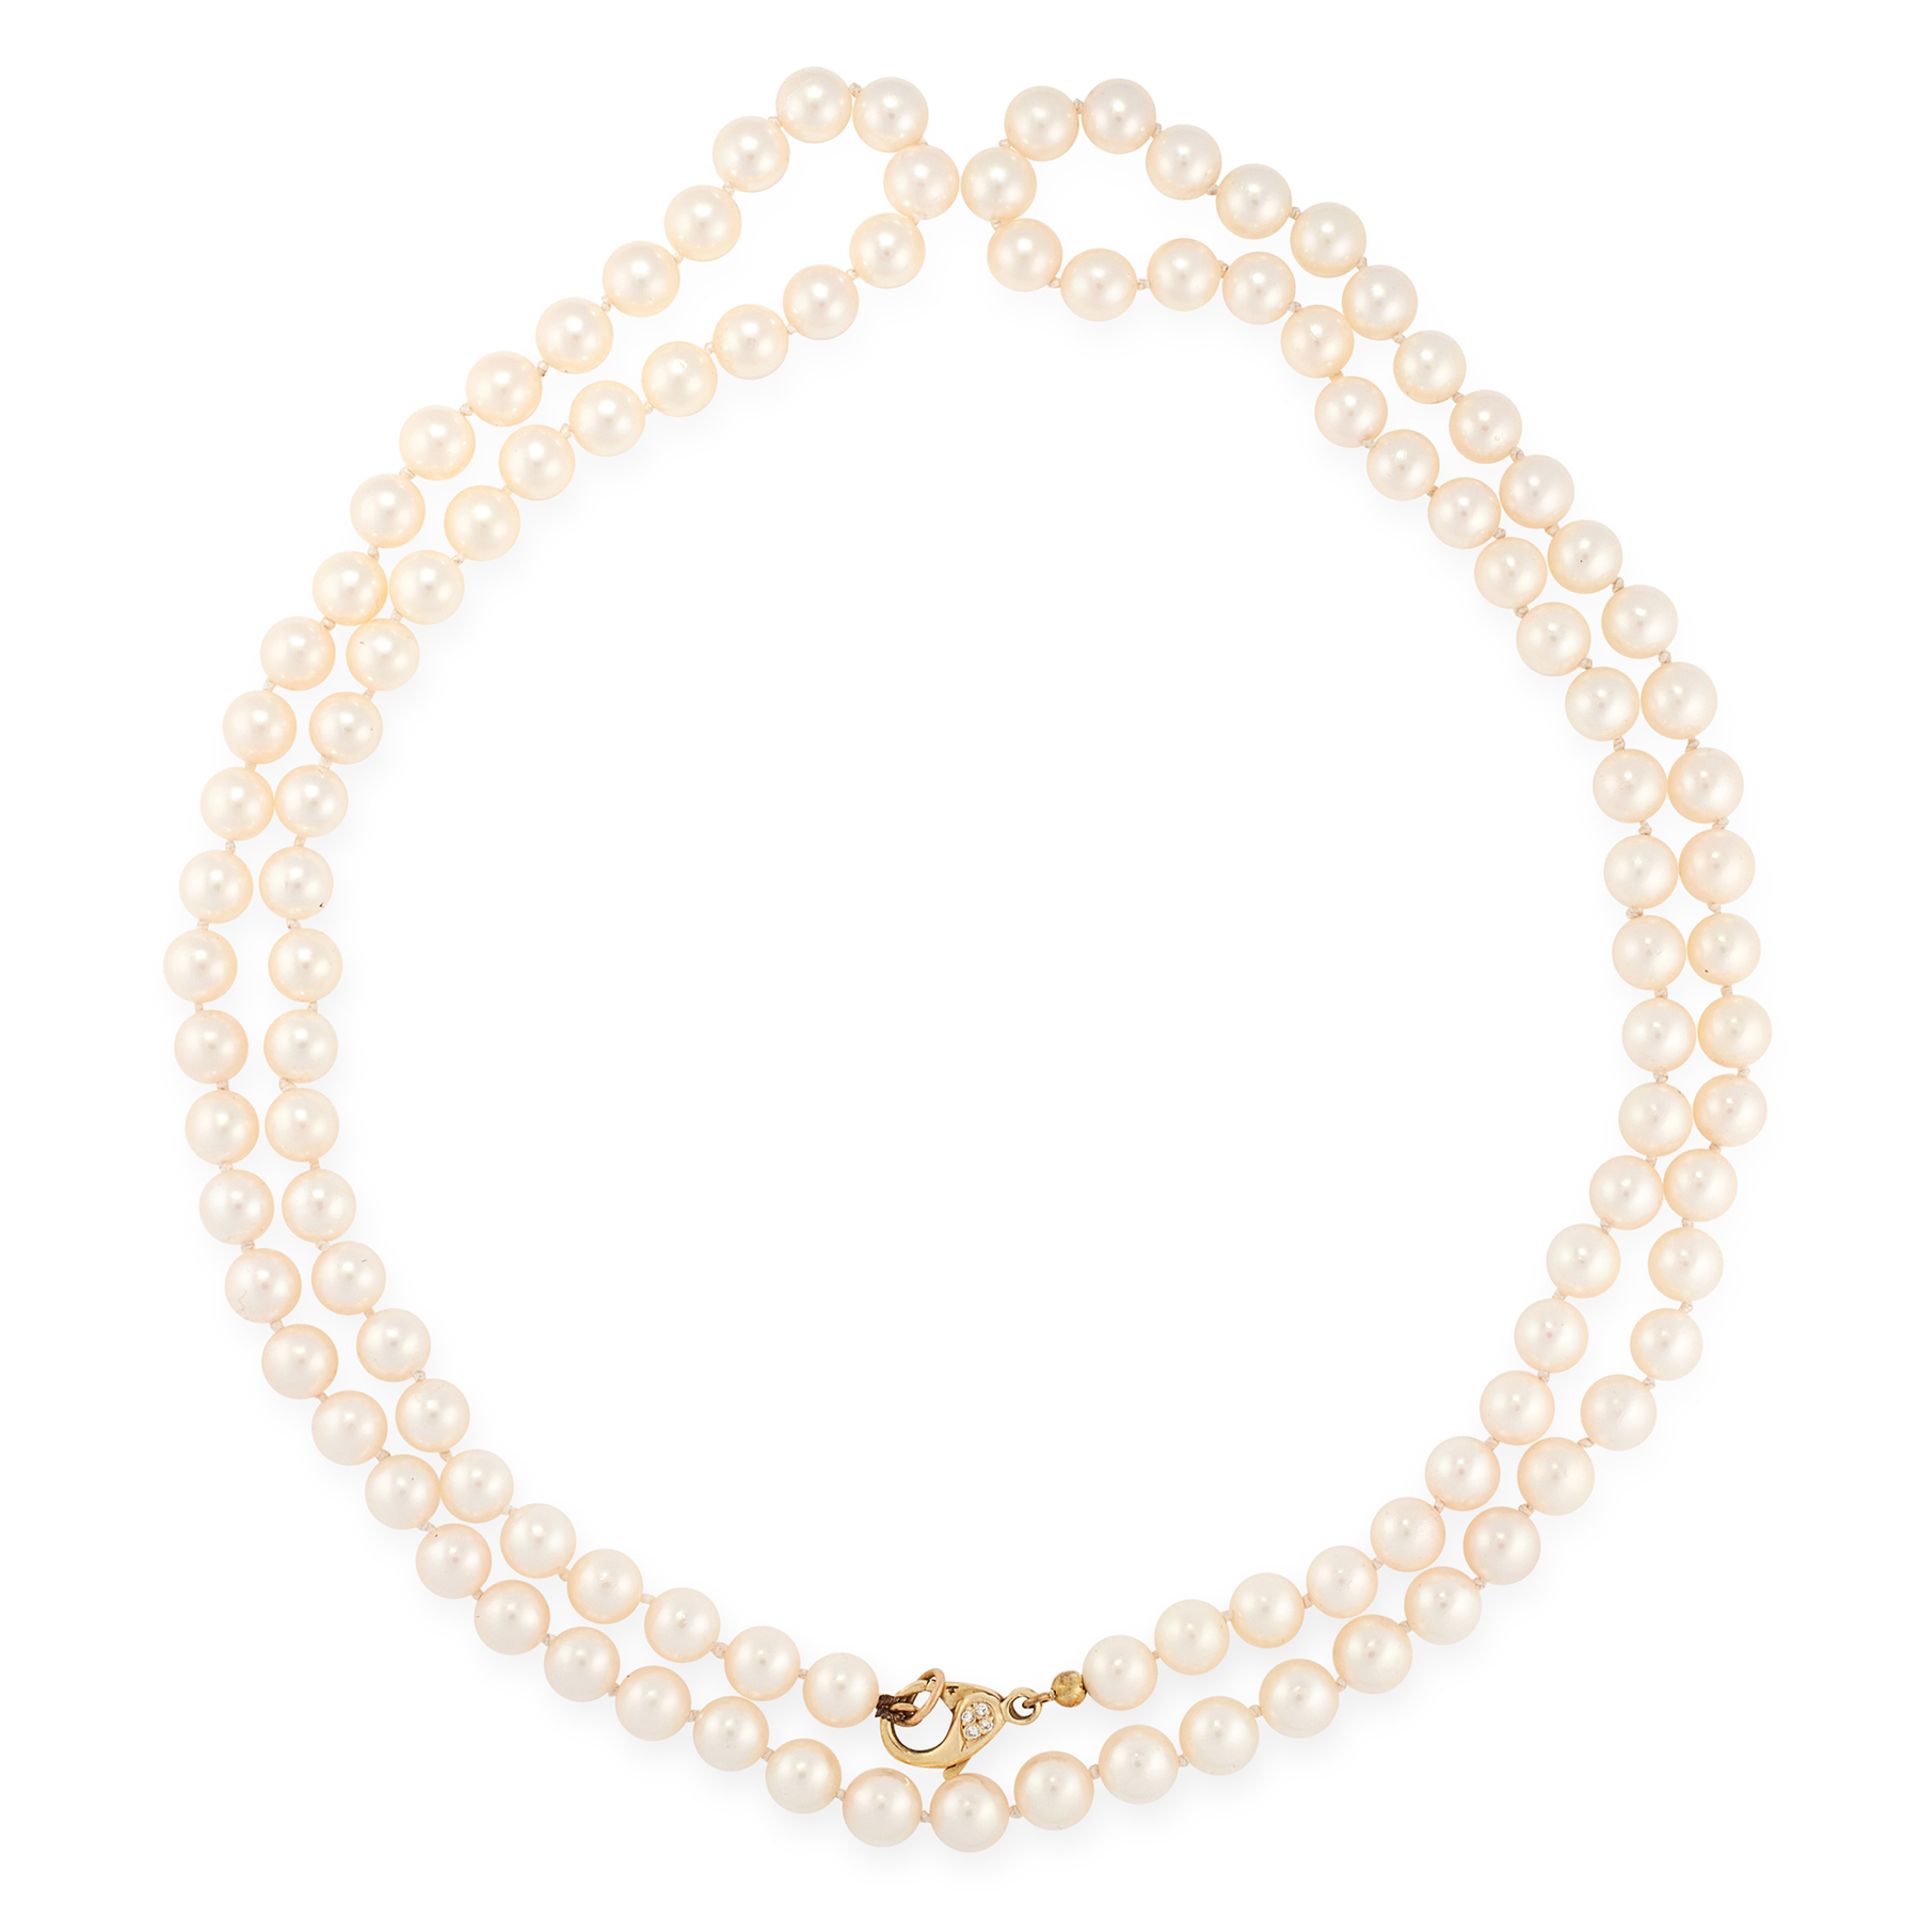 A PEARL AND DIAMOND SAUTOIR NECKLACE in 18ct yellow gold, comprising a single row of one hundred and